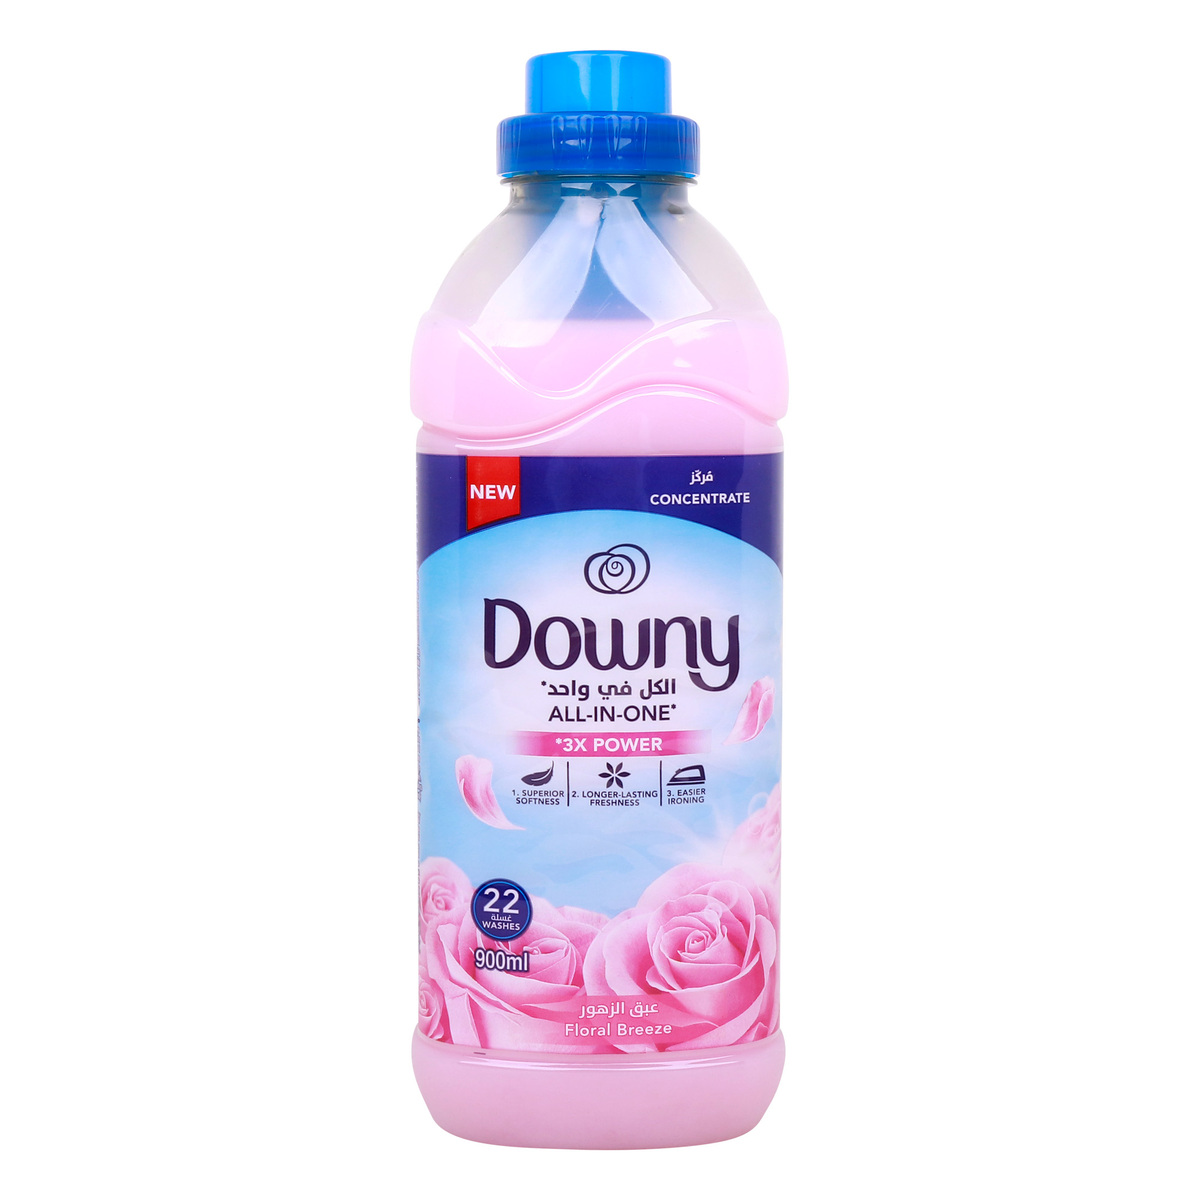 Downy Fabric Softener Concentrated Floral Breeze, 900 ml